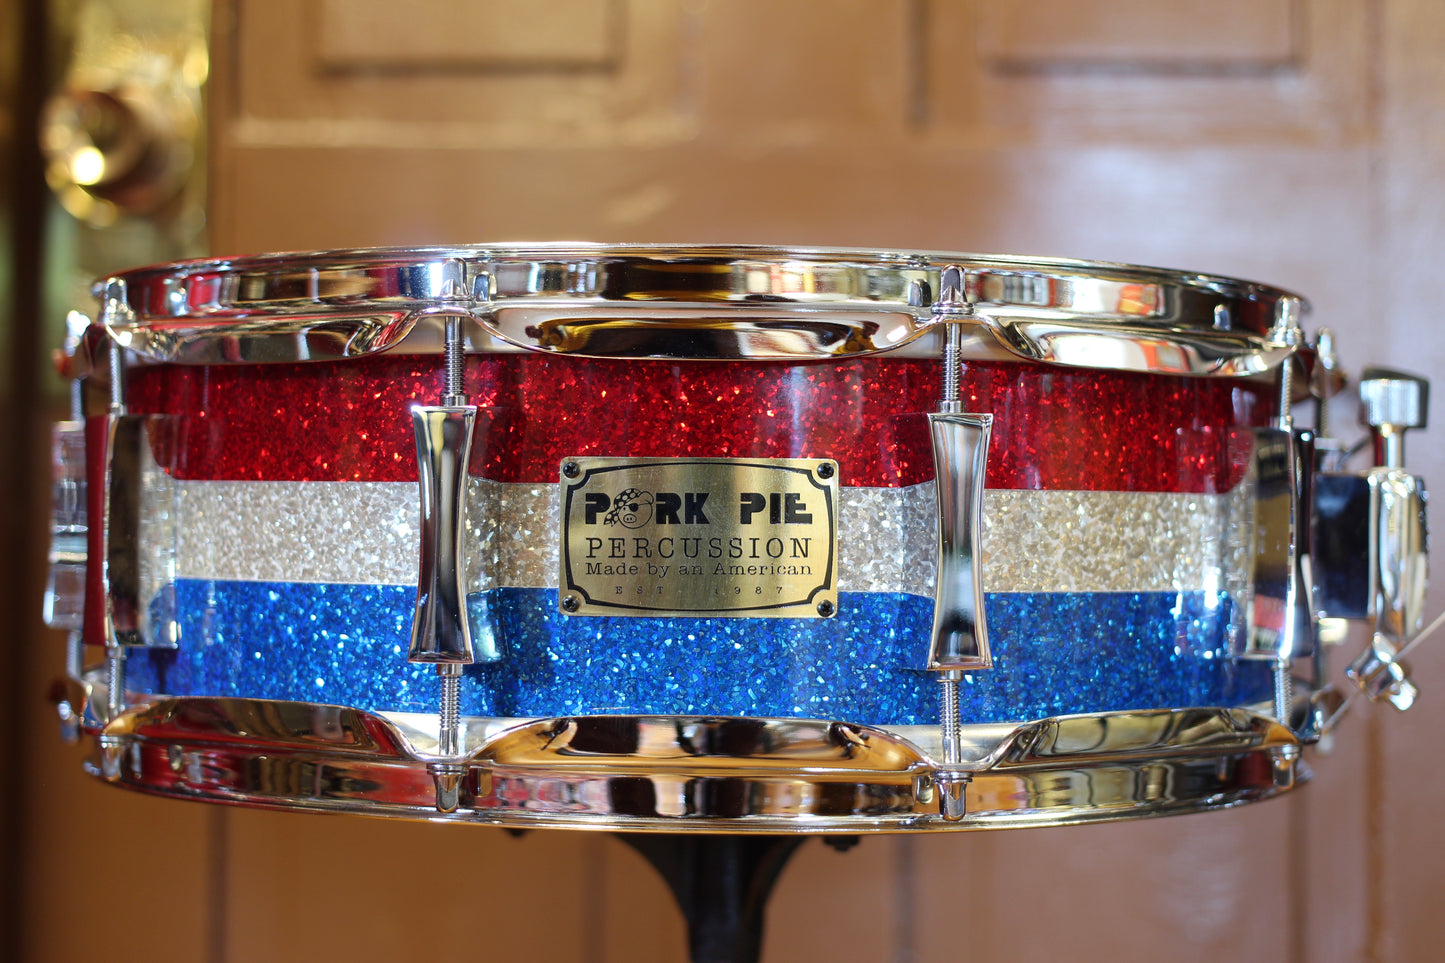 2022 Pork Pie Percussion Snare Drum 5"x14" in Red Silver Blue Banded Pearl